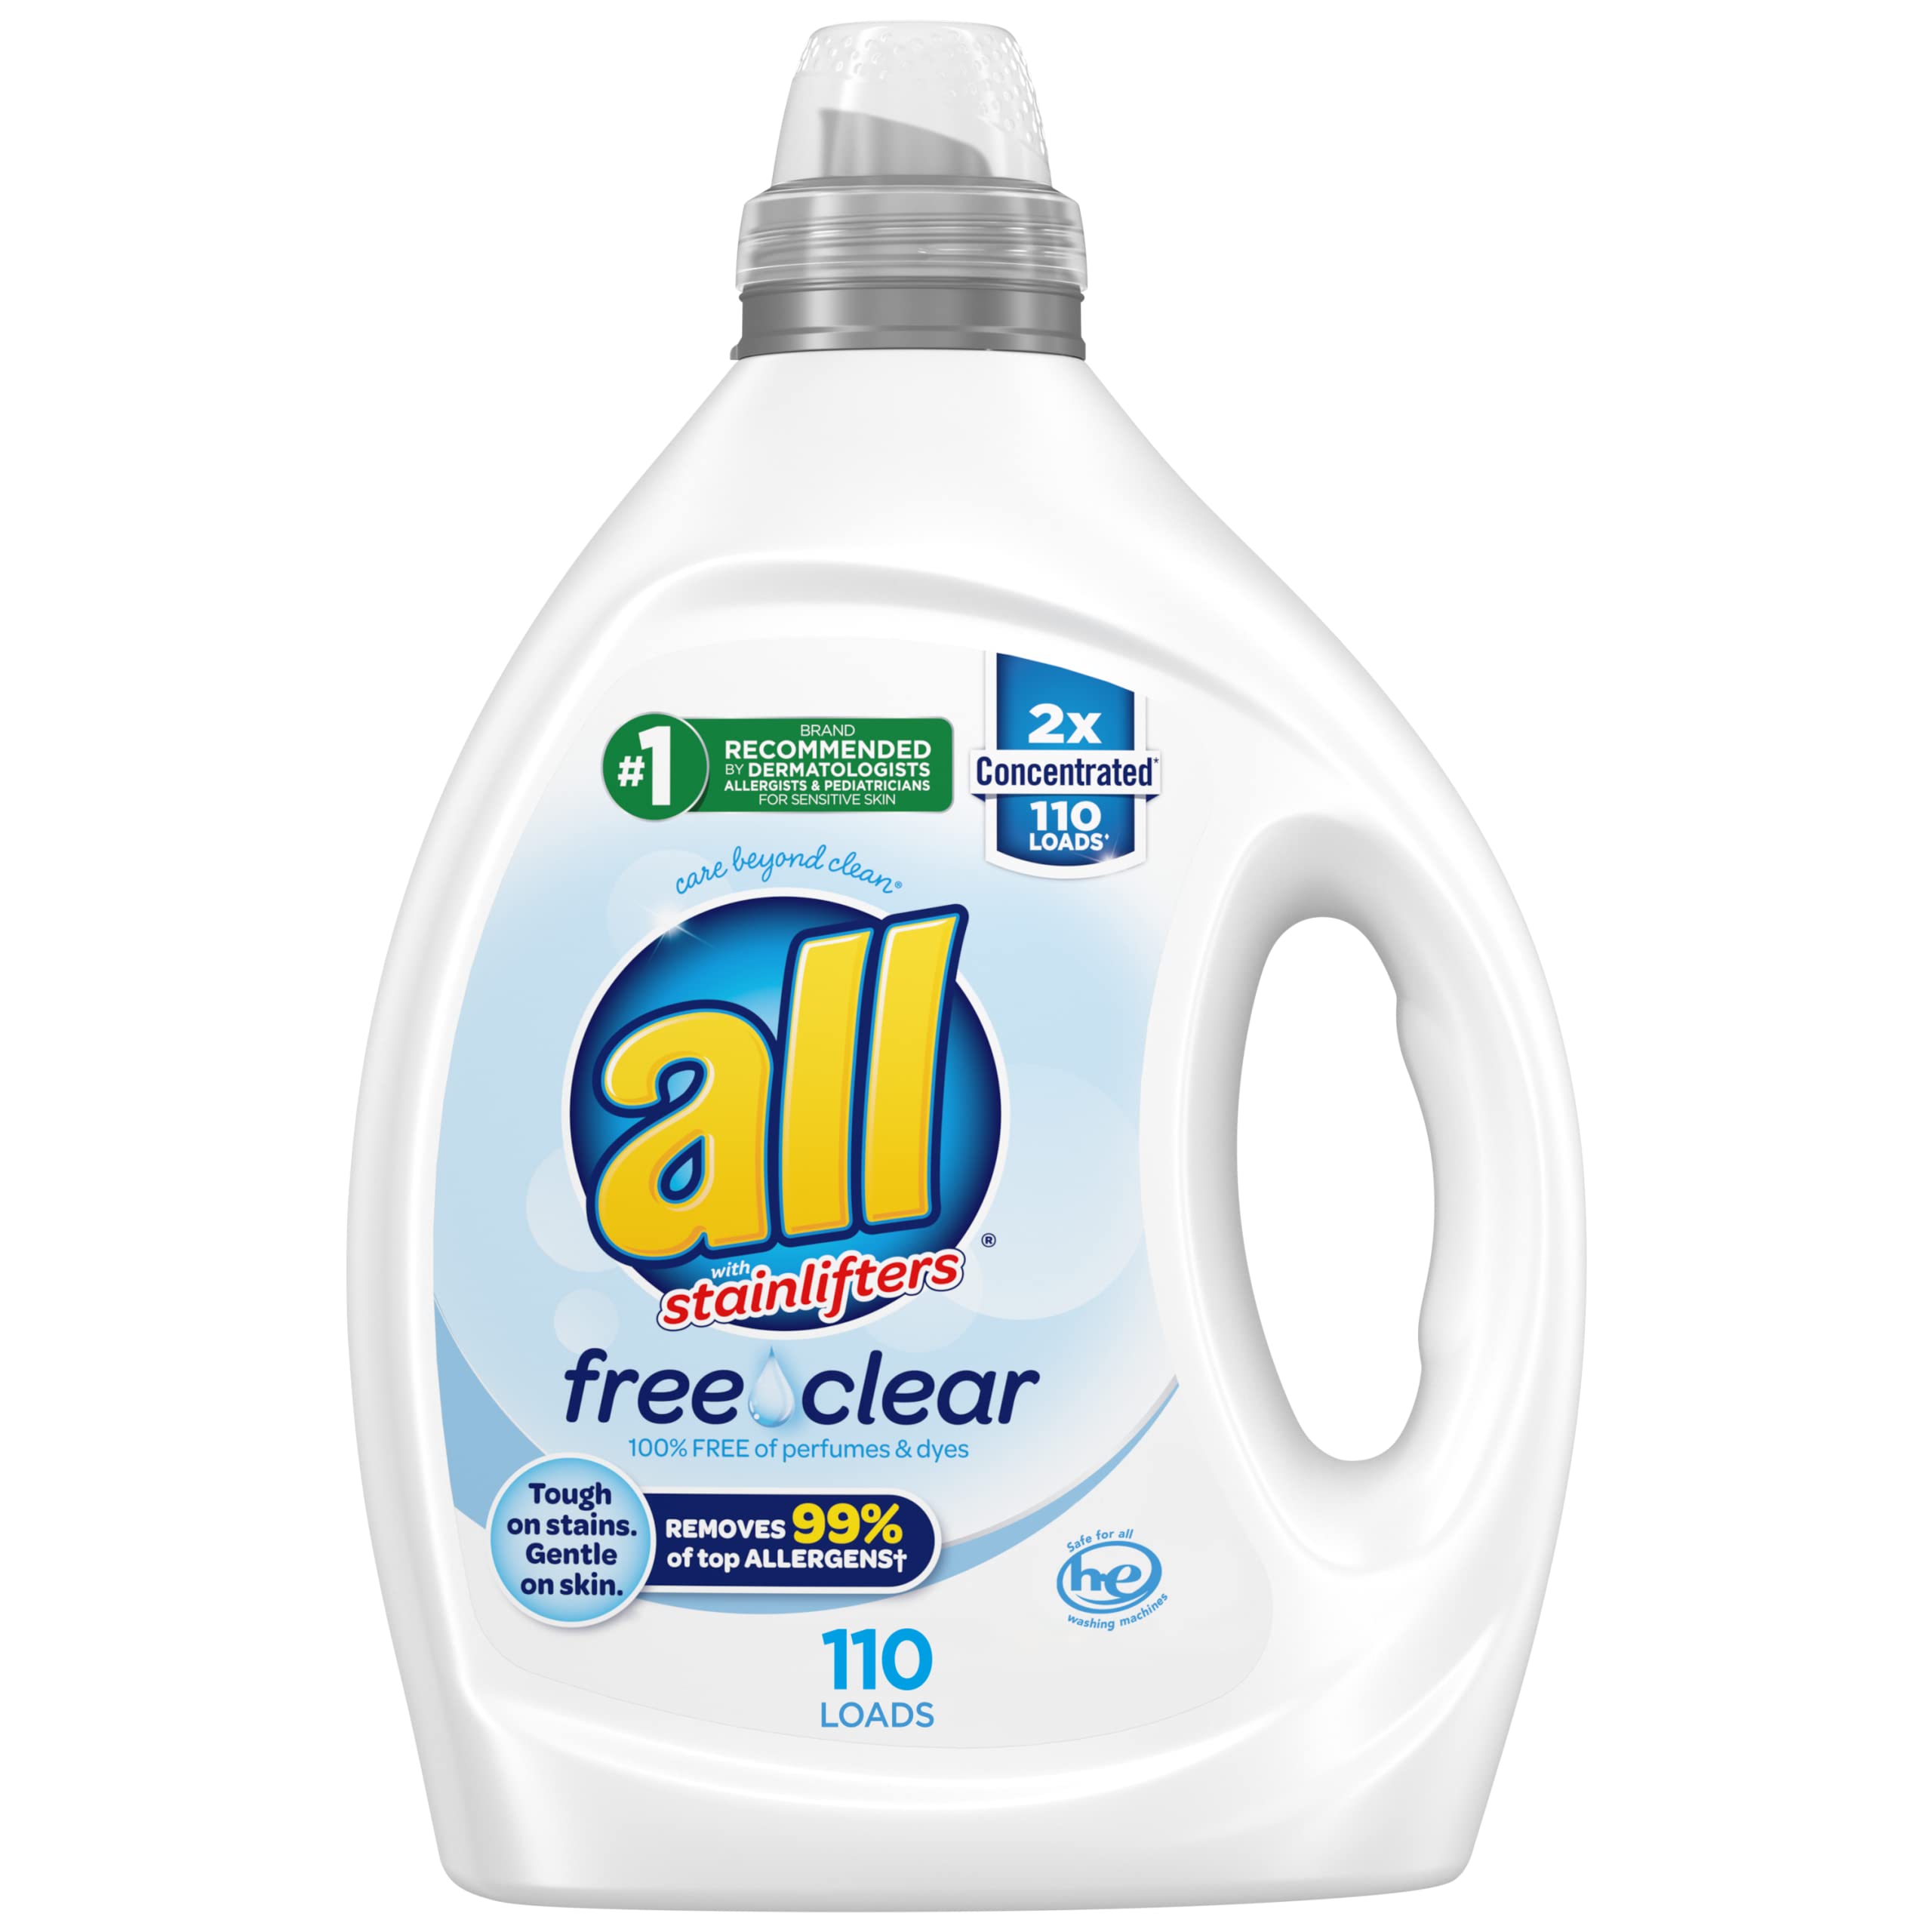 All Free _ Clear with Stainlifters Detergent